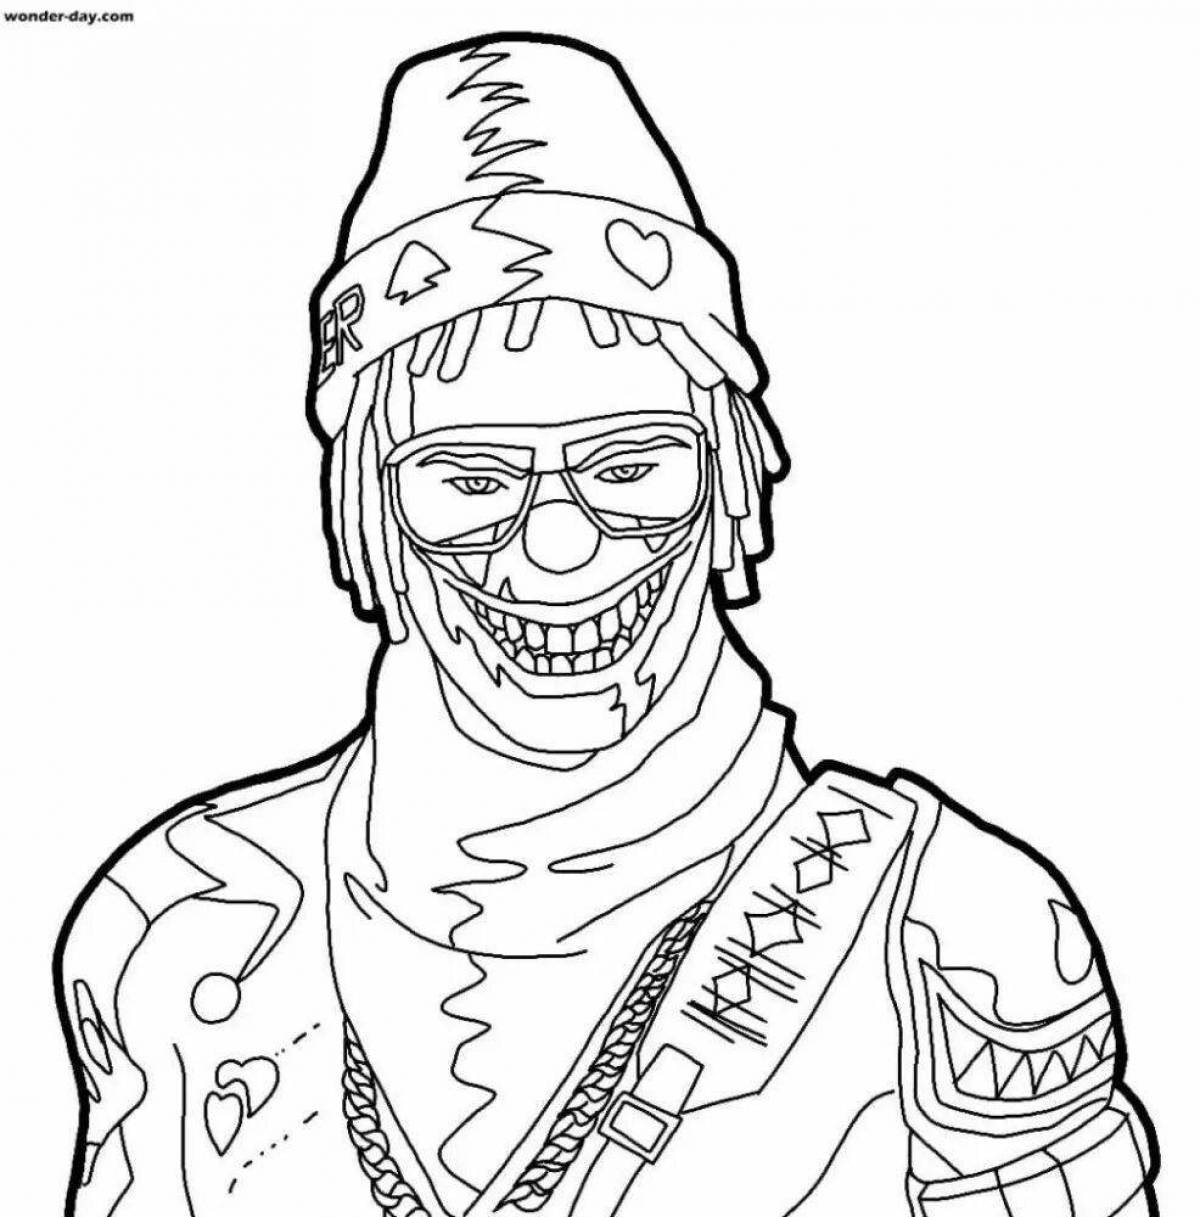 Colorful free fire coloring page for boys